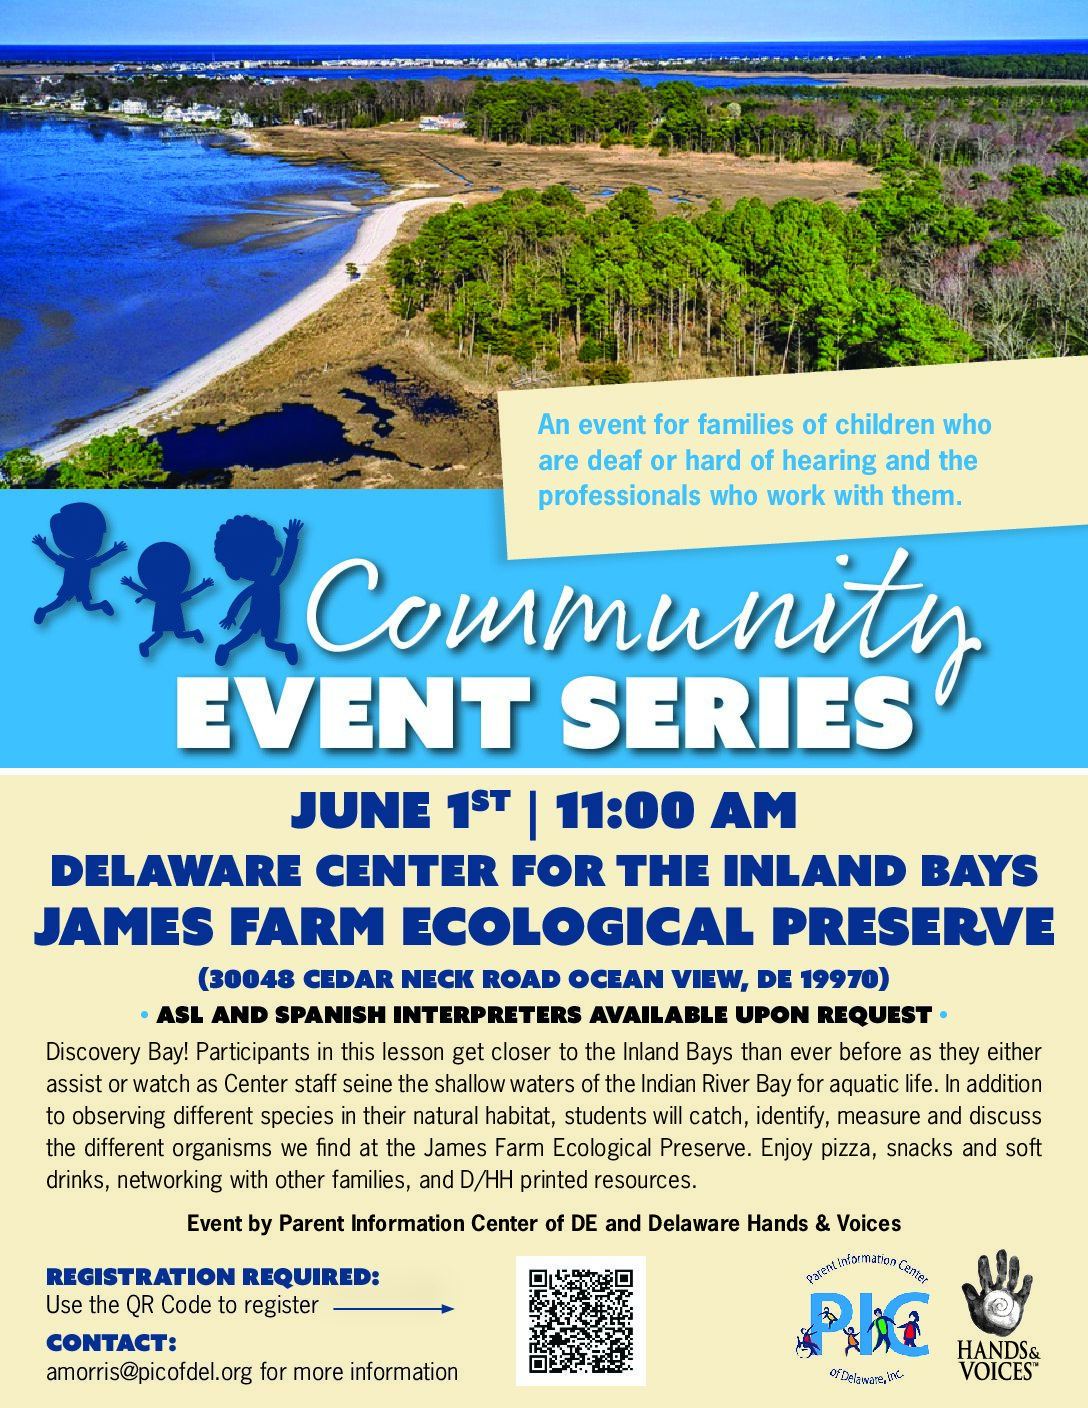 Delaware Center for the Inland Bays James Farm Ecological Preserve